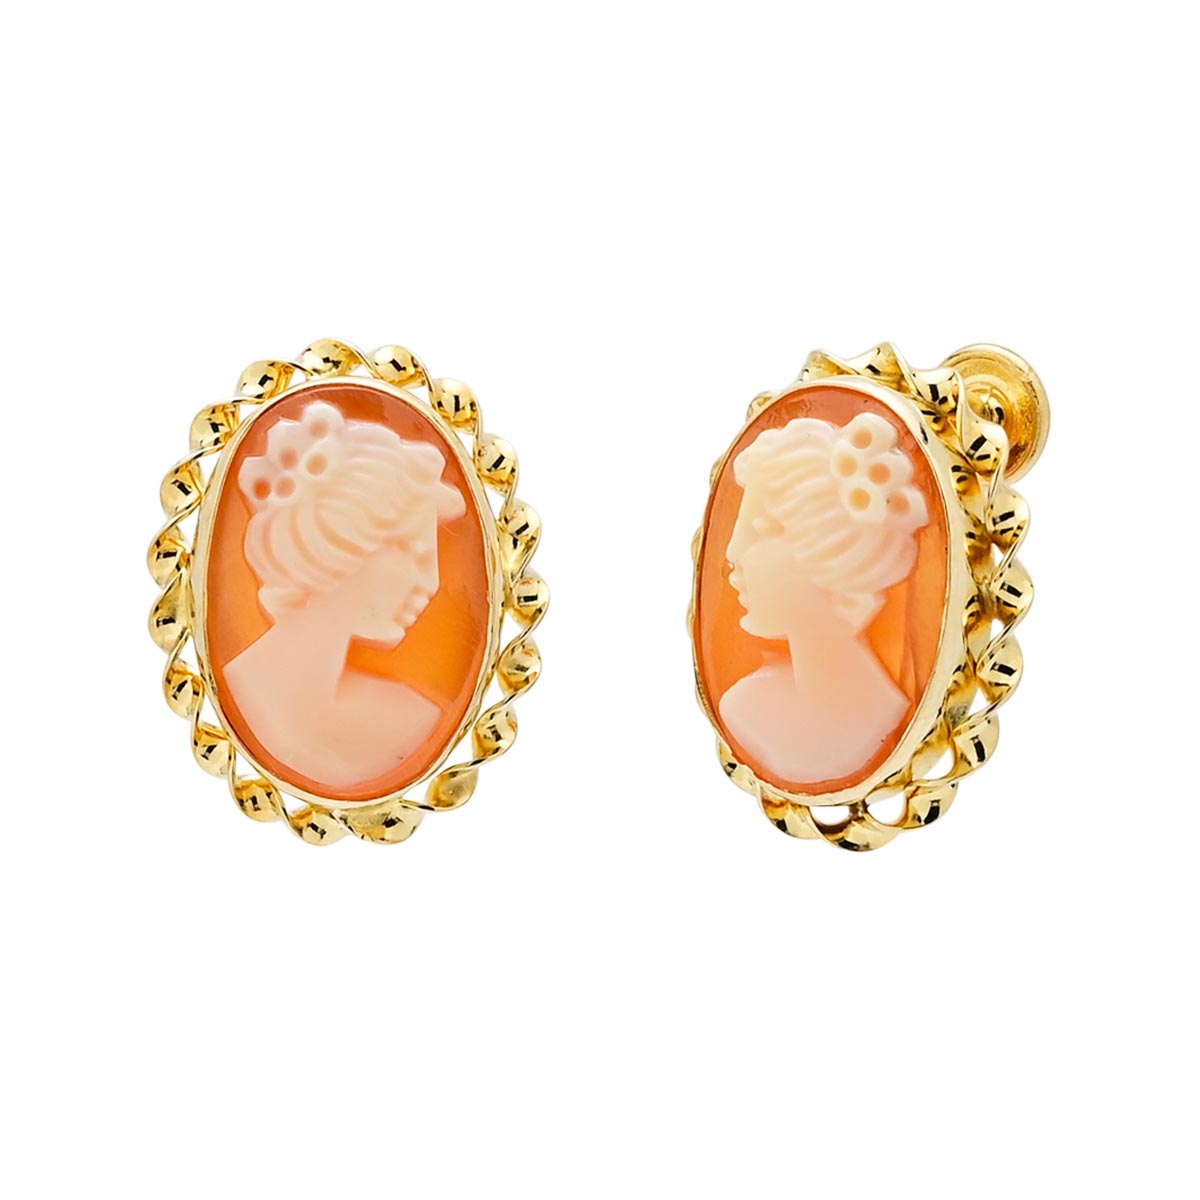 Estate Non Pierced Oval Cameo Earrings in 14kt Yellow Gold